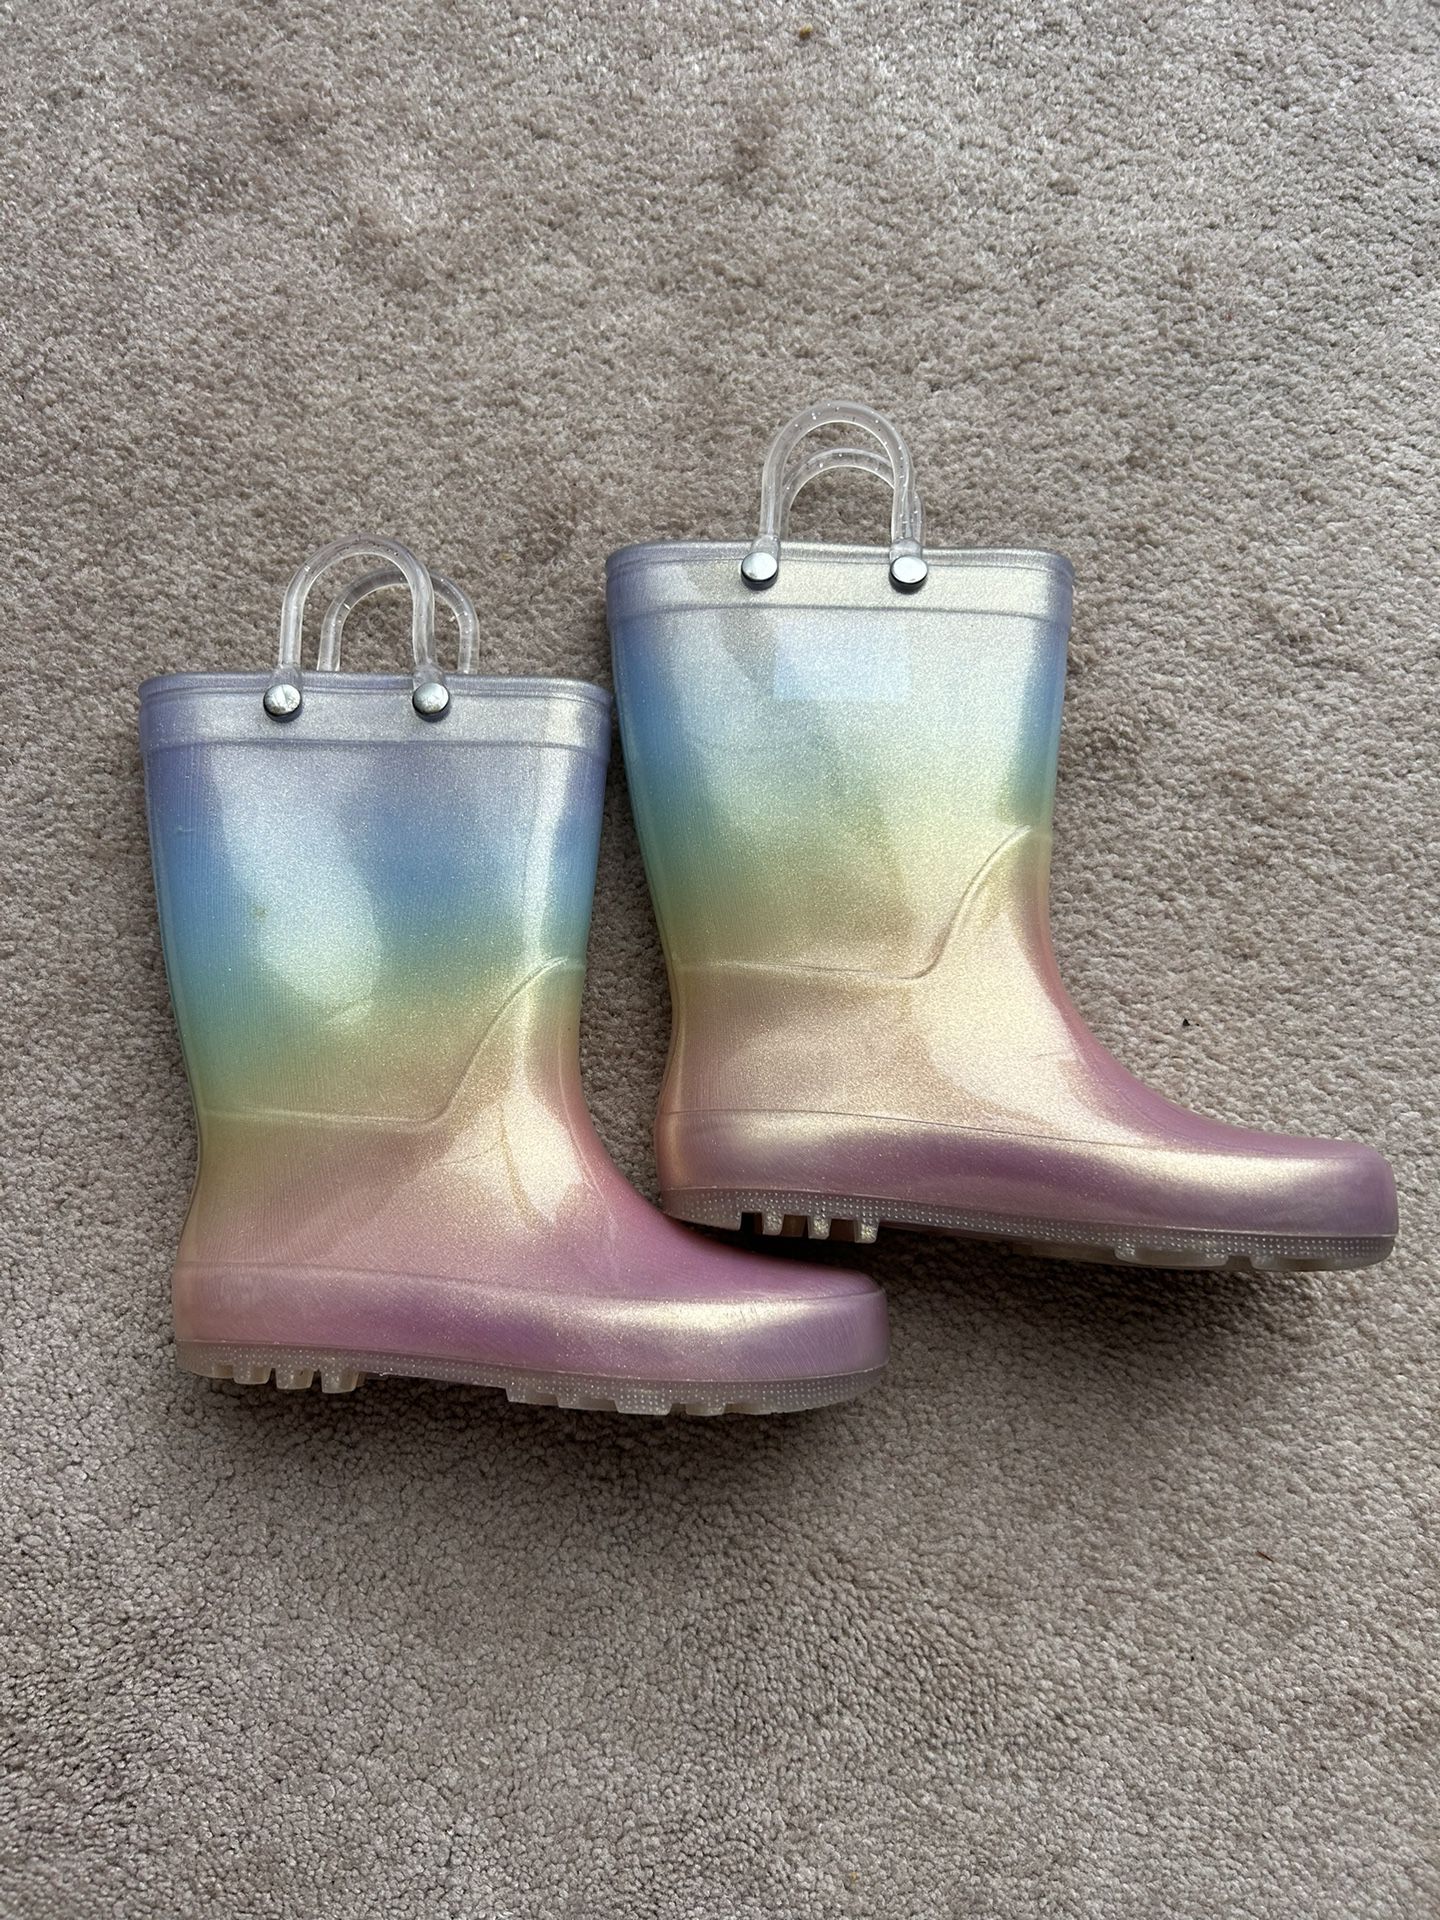 Cat And Jack Toddler Size 9 Rain Boots